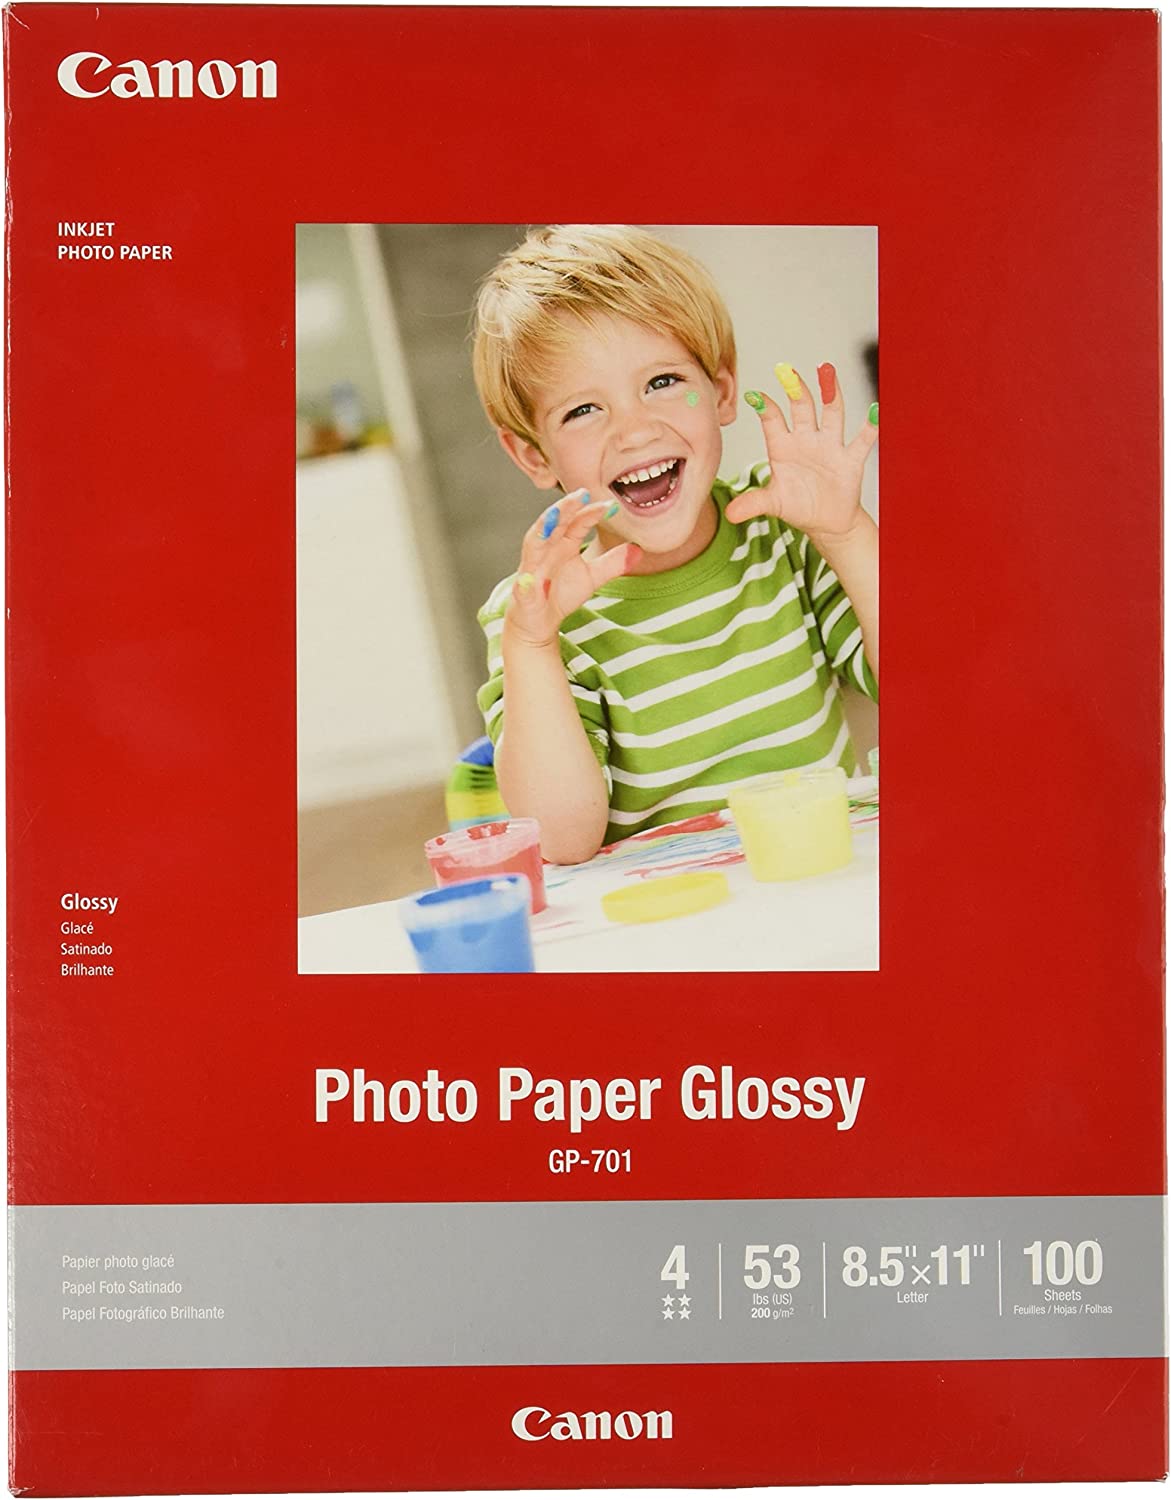 Canon GP-701 LTR 100SH GP-701 LTR Photo Paper Glossy (100 Sheets/Package)